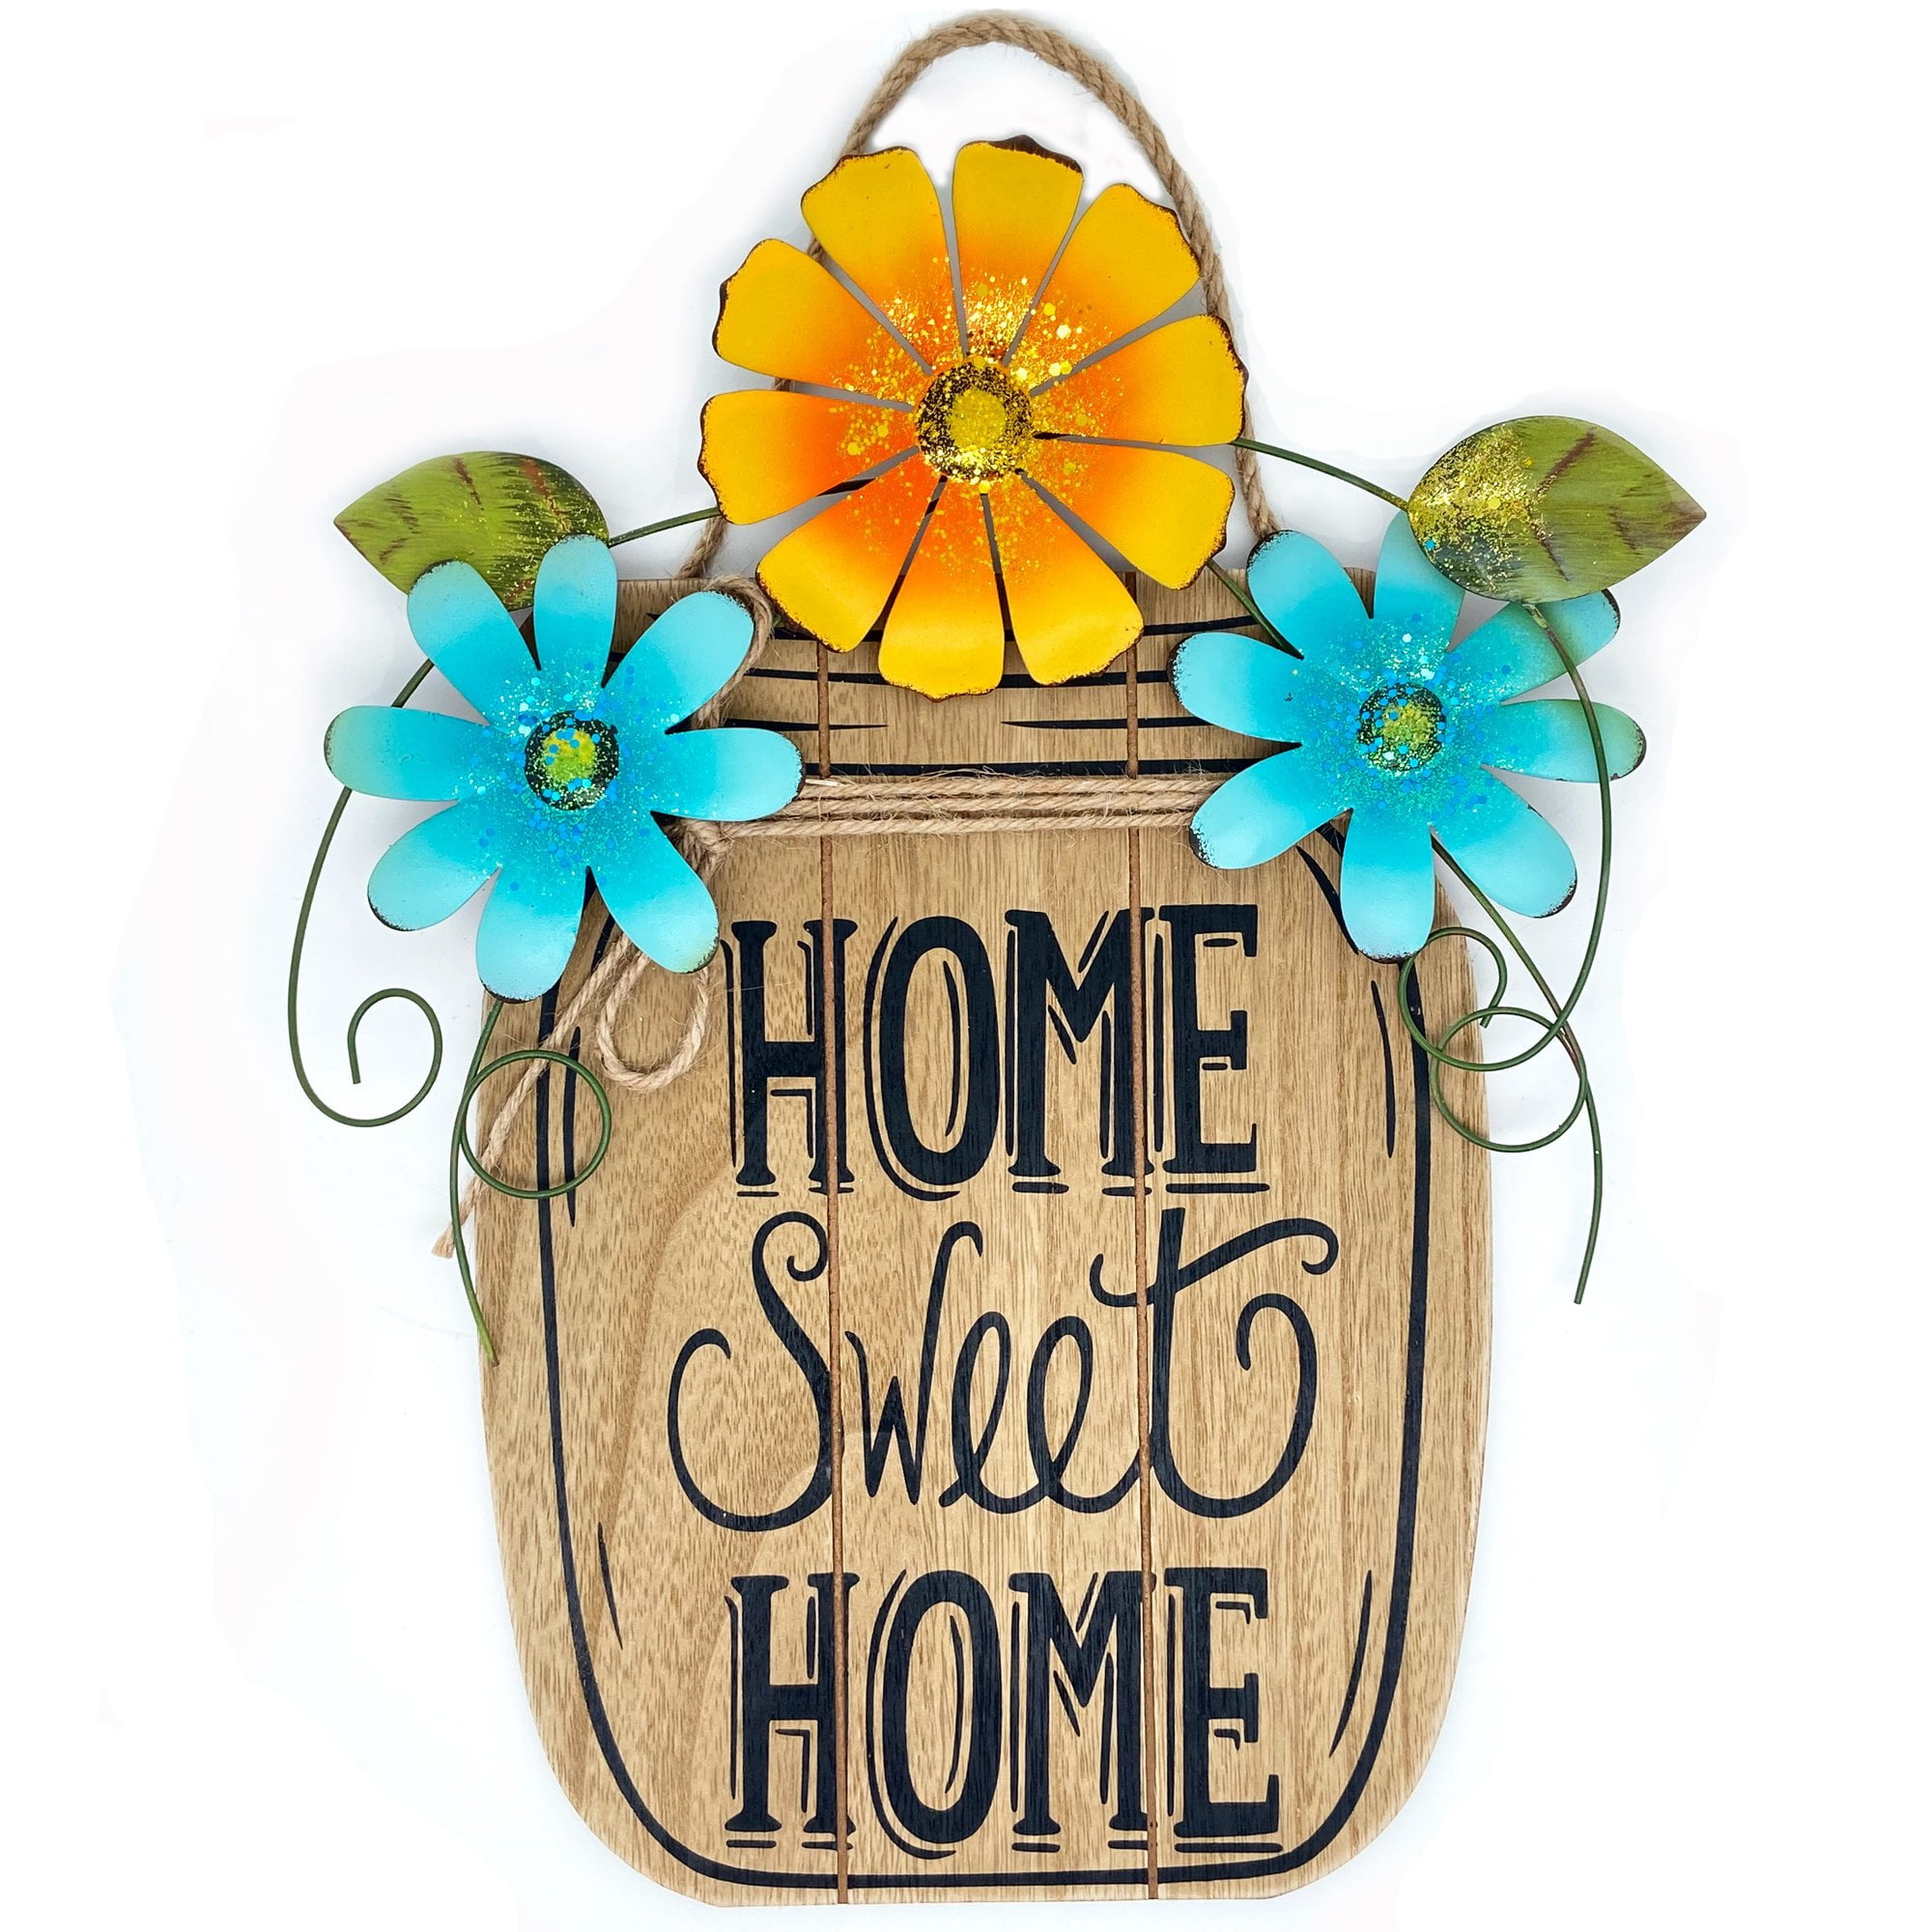 Home Accent Wooden Sunflower Hanging Plaque Welcome Sign Fall Harvest Thanksgiving Wall Décor